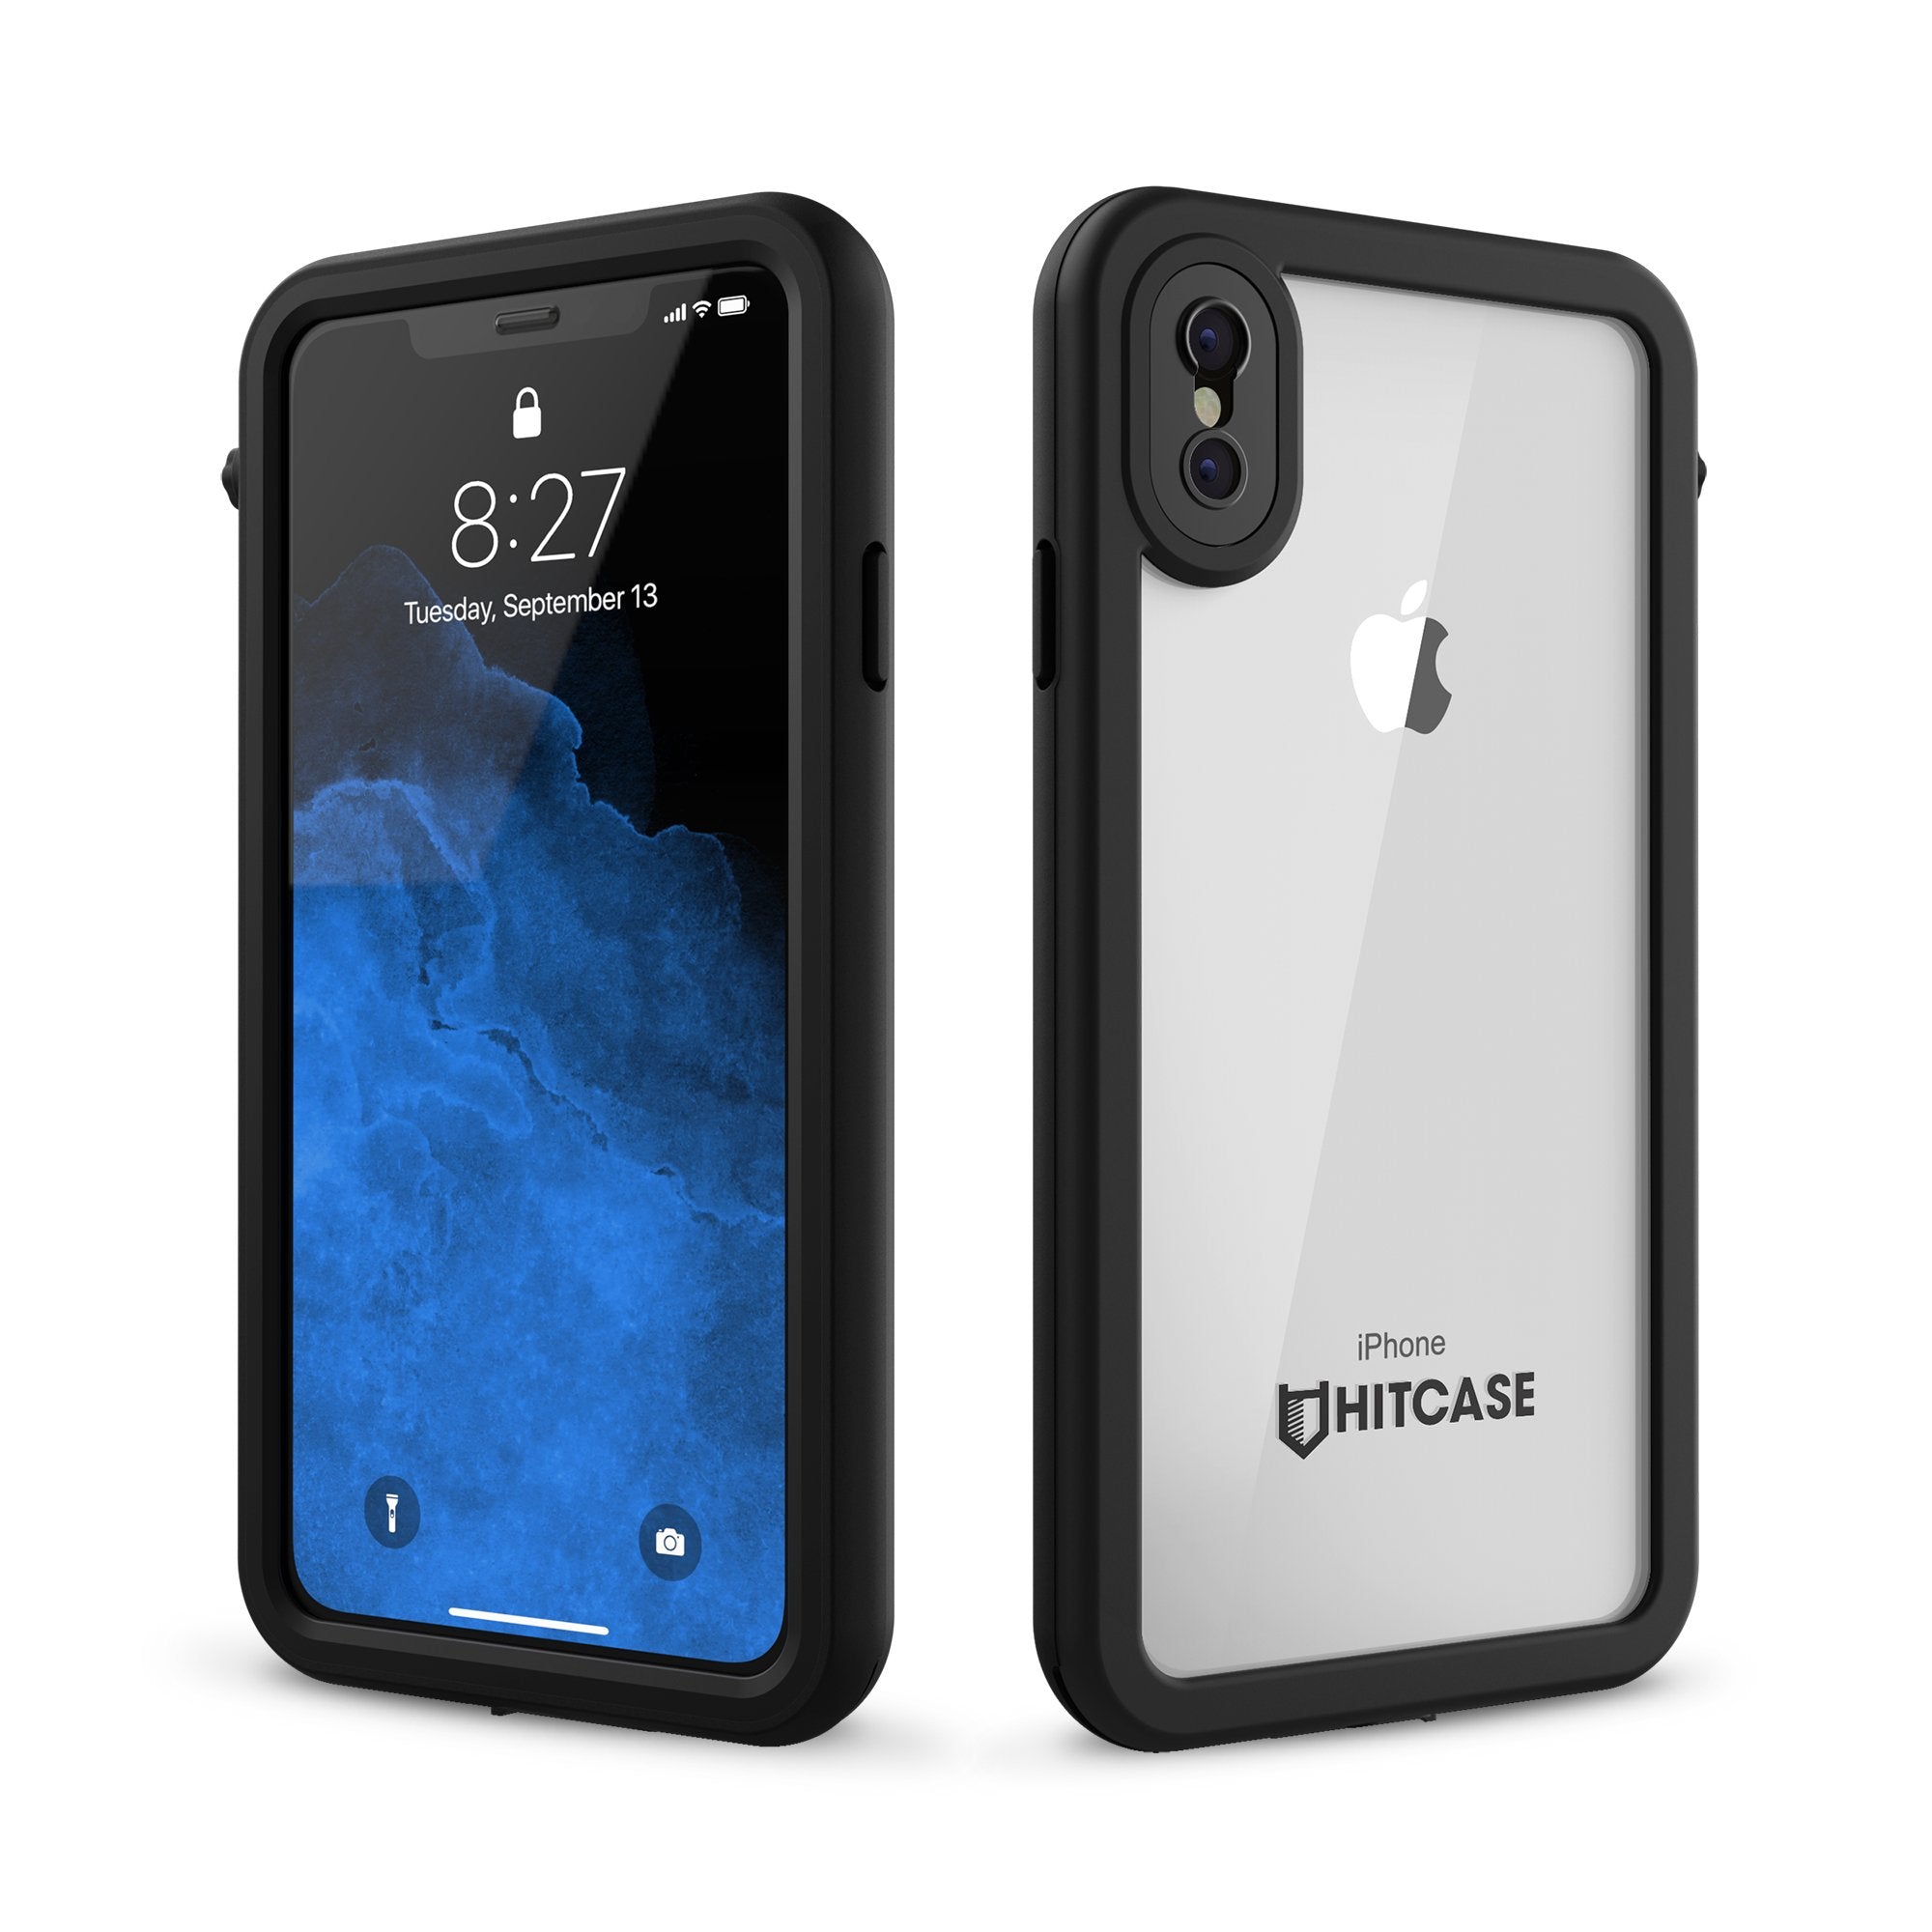 Apple iPhone XS Max Mobile Back Cover